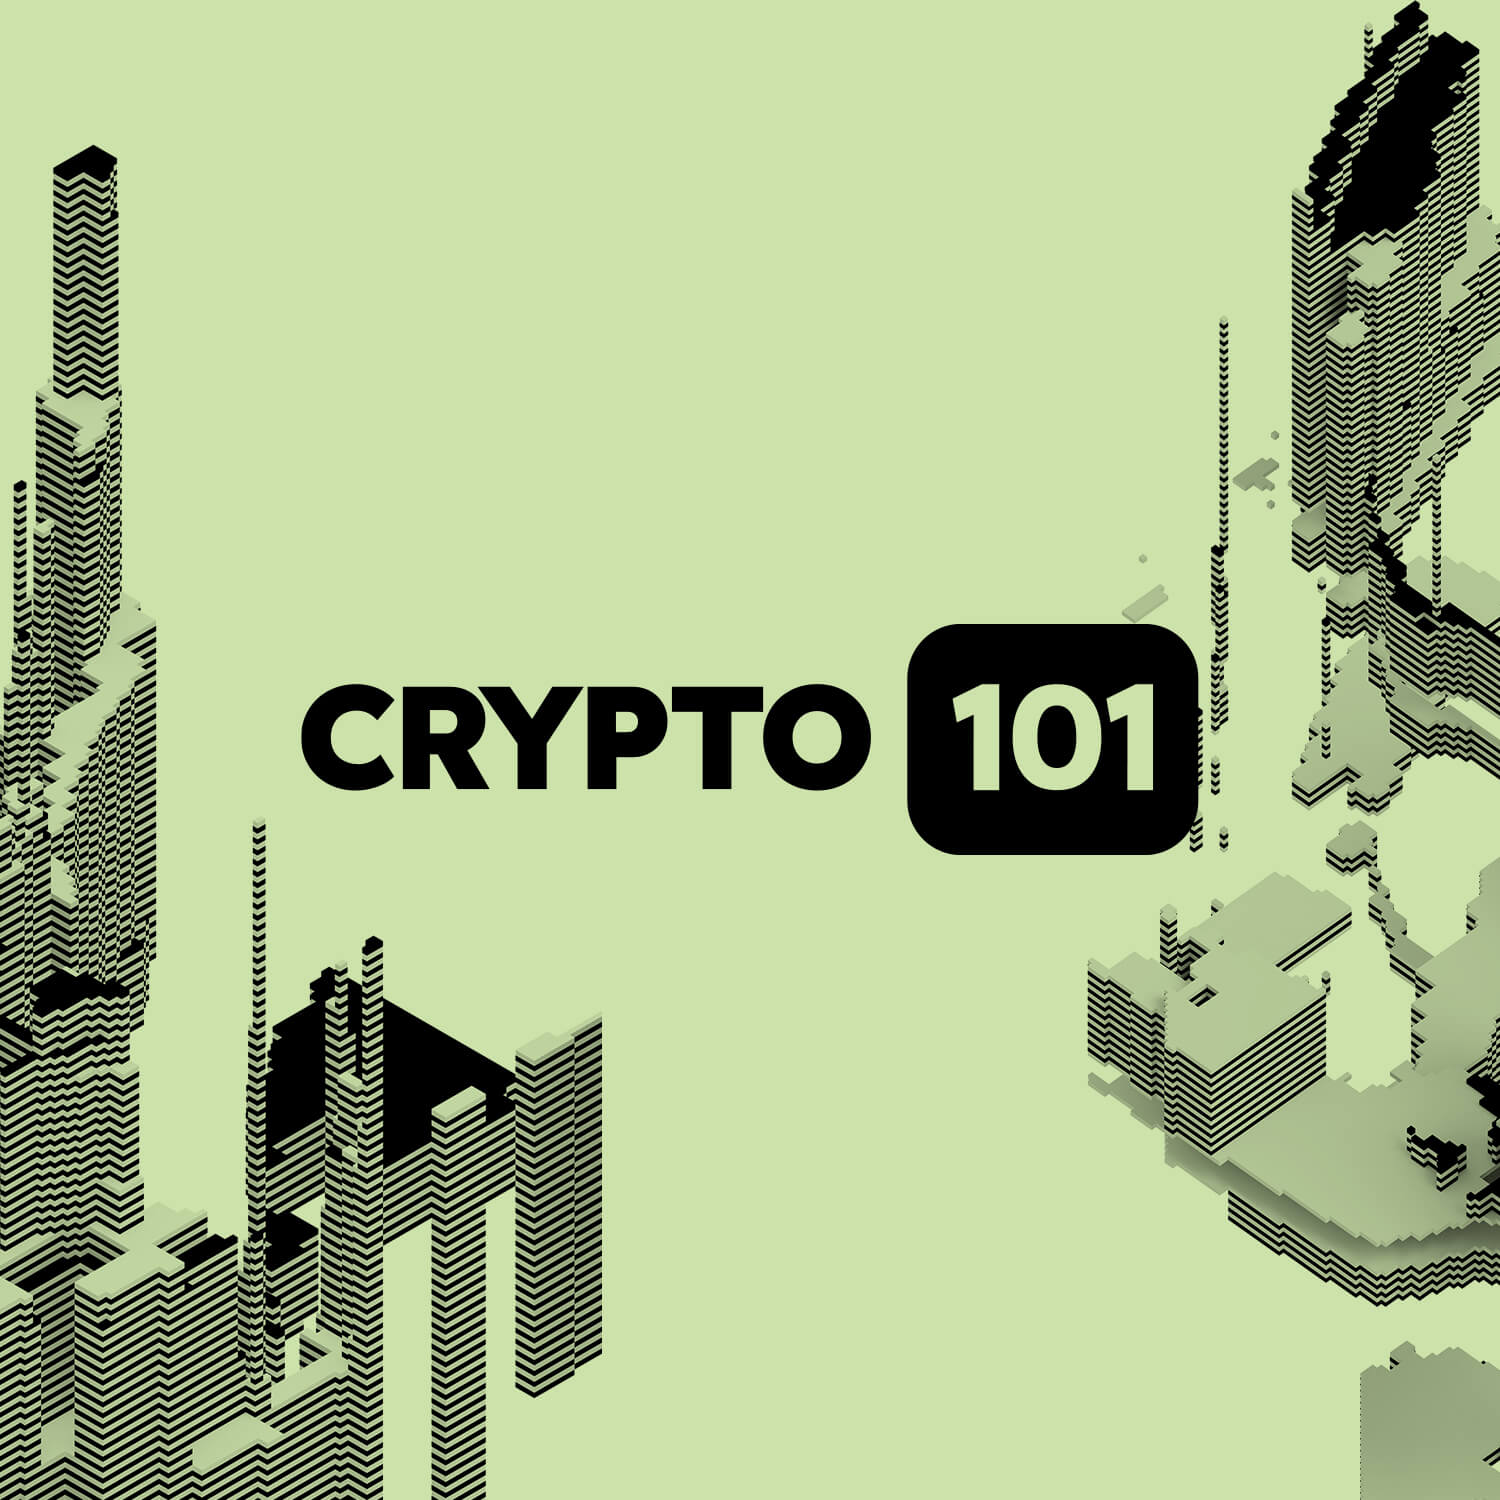 Crypto 101: How To Secure Your Cryptocurrency